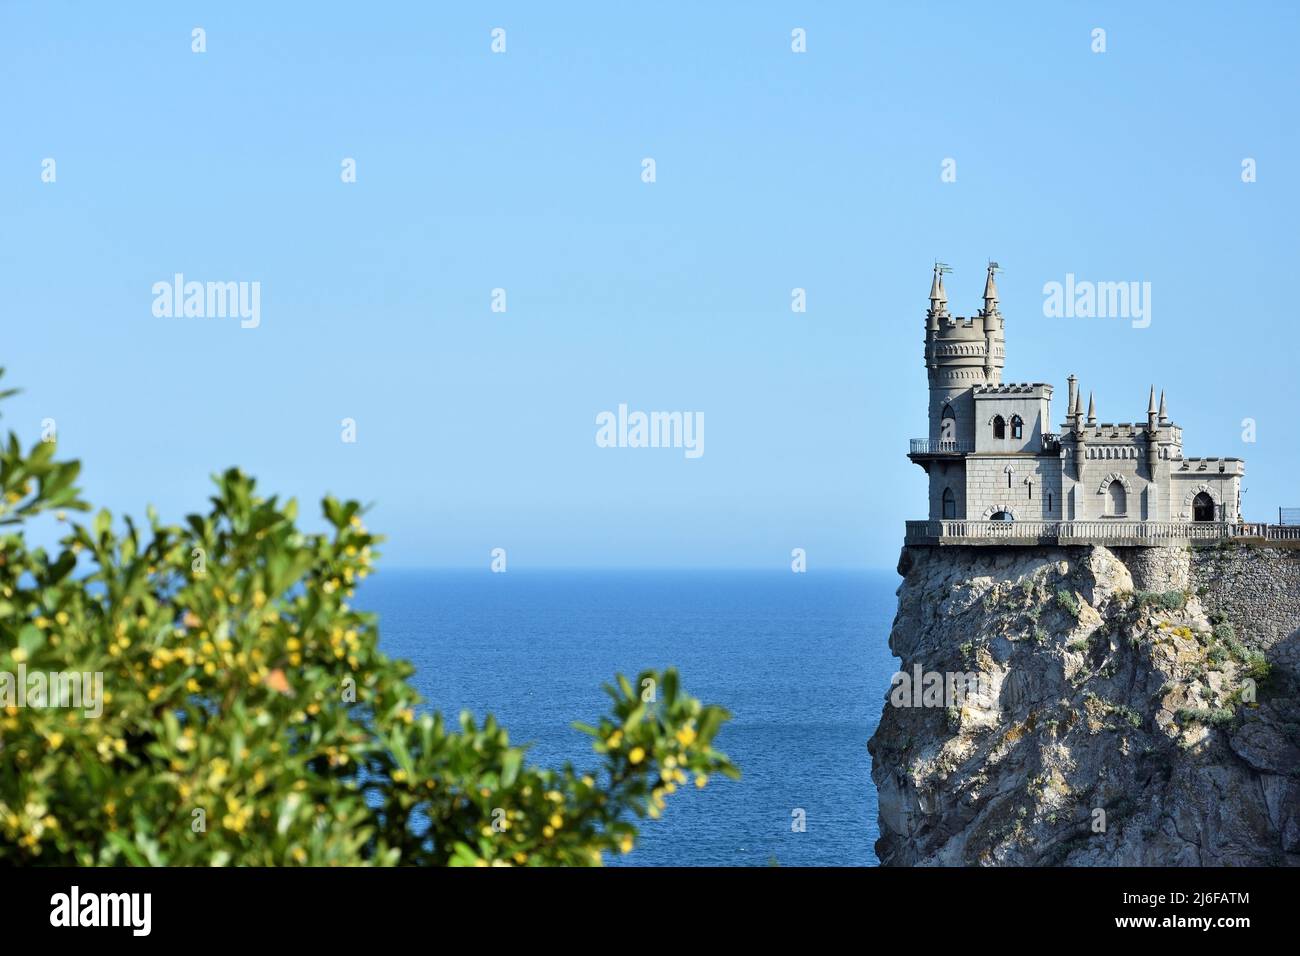 Castle Swallow's Nest on a rock at Black Sea, Crimea, Russia. It is a symbol and tourist attraction of Crimea Stock Photo